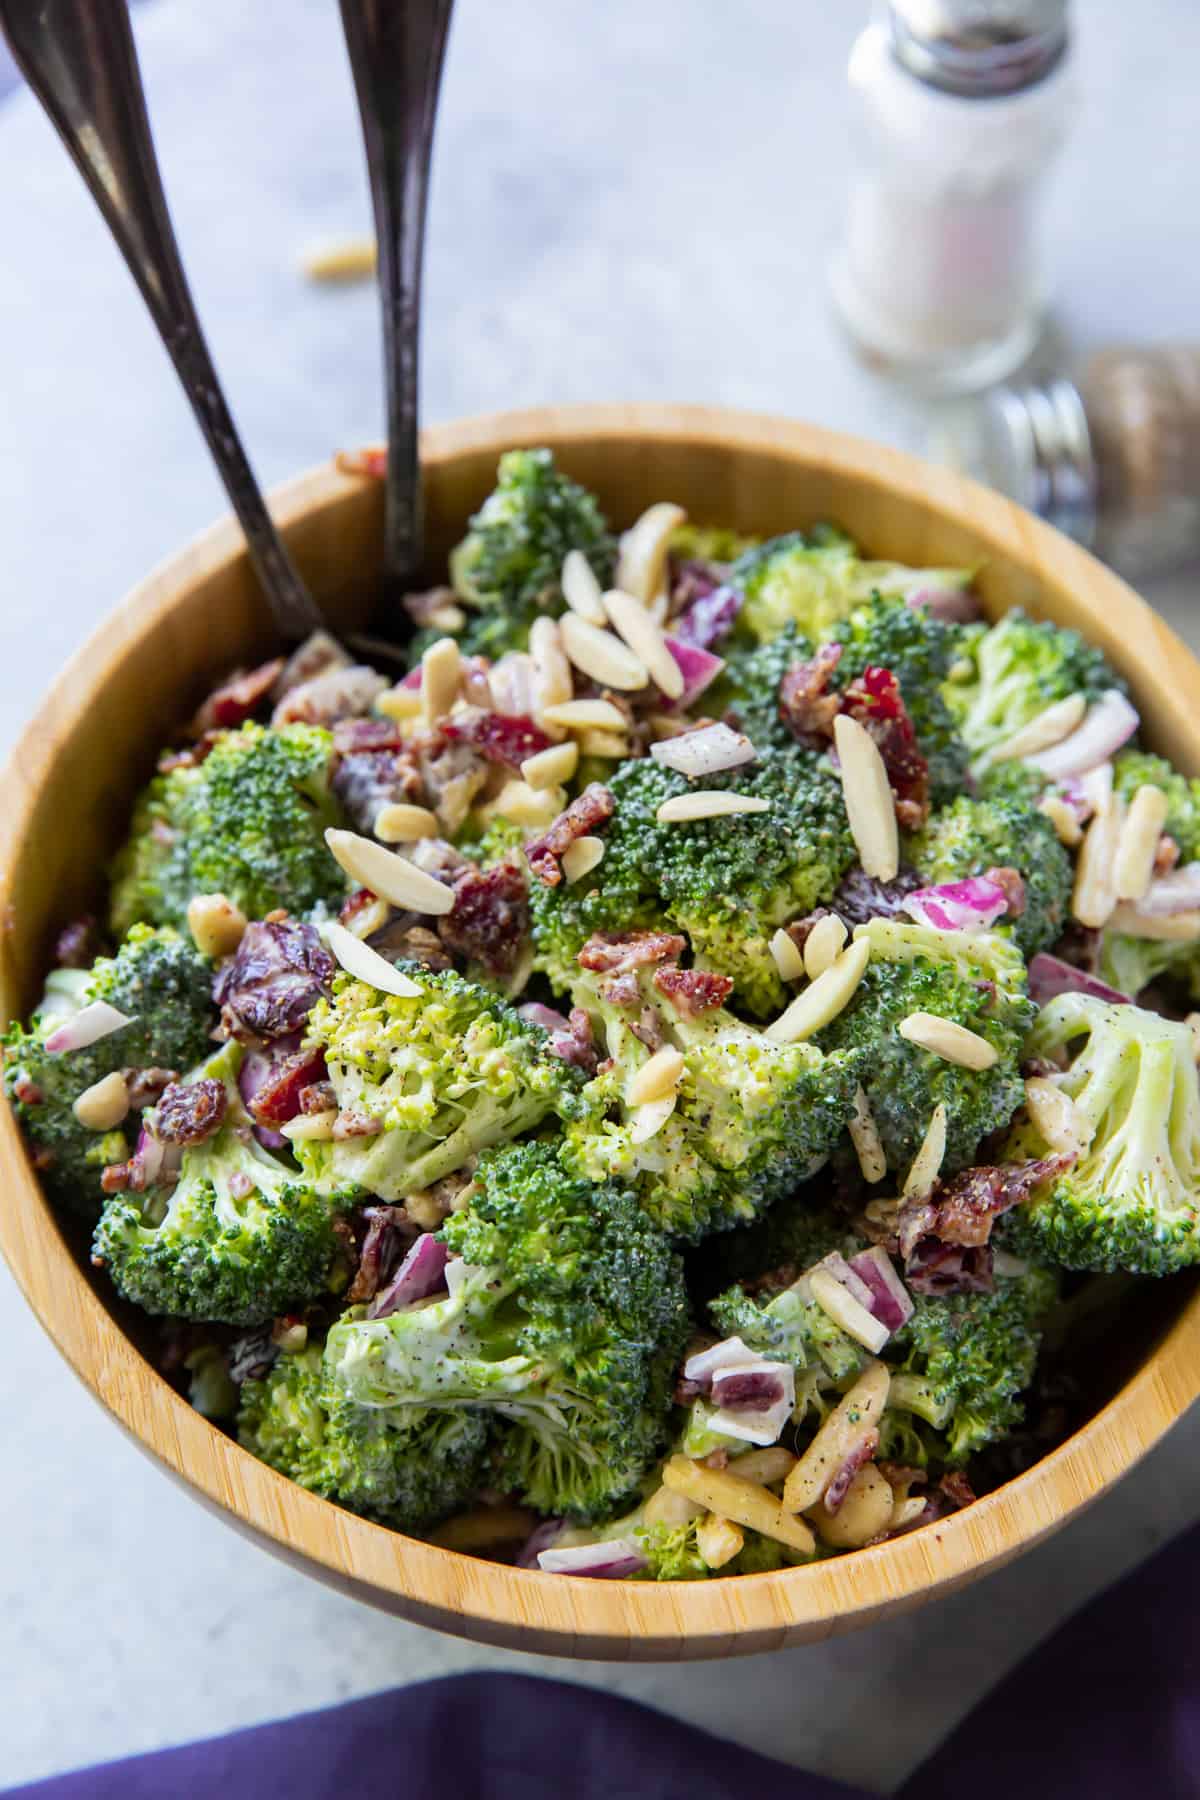 BRoccoli salad in a wooden bowl.